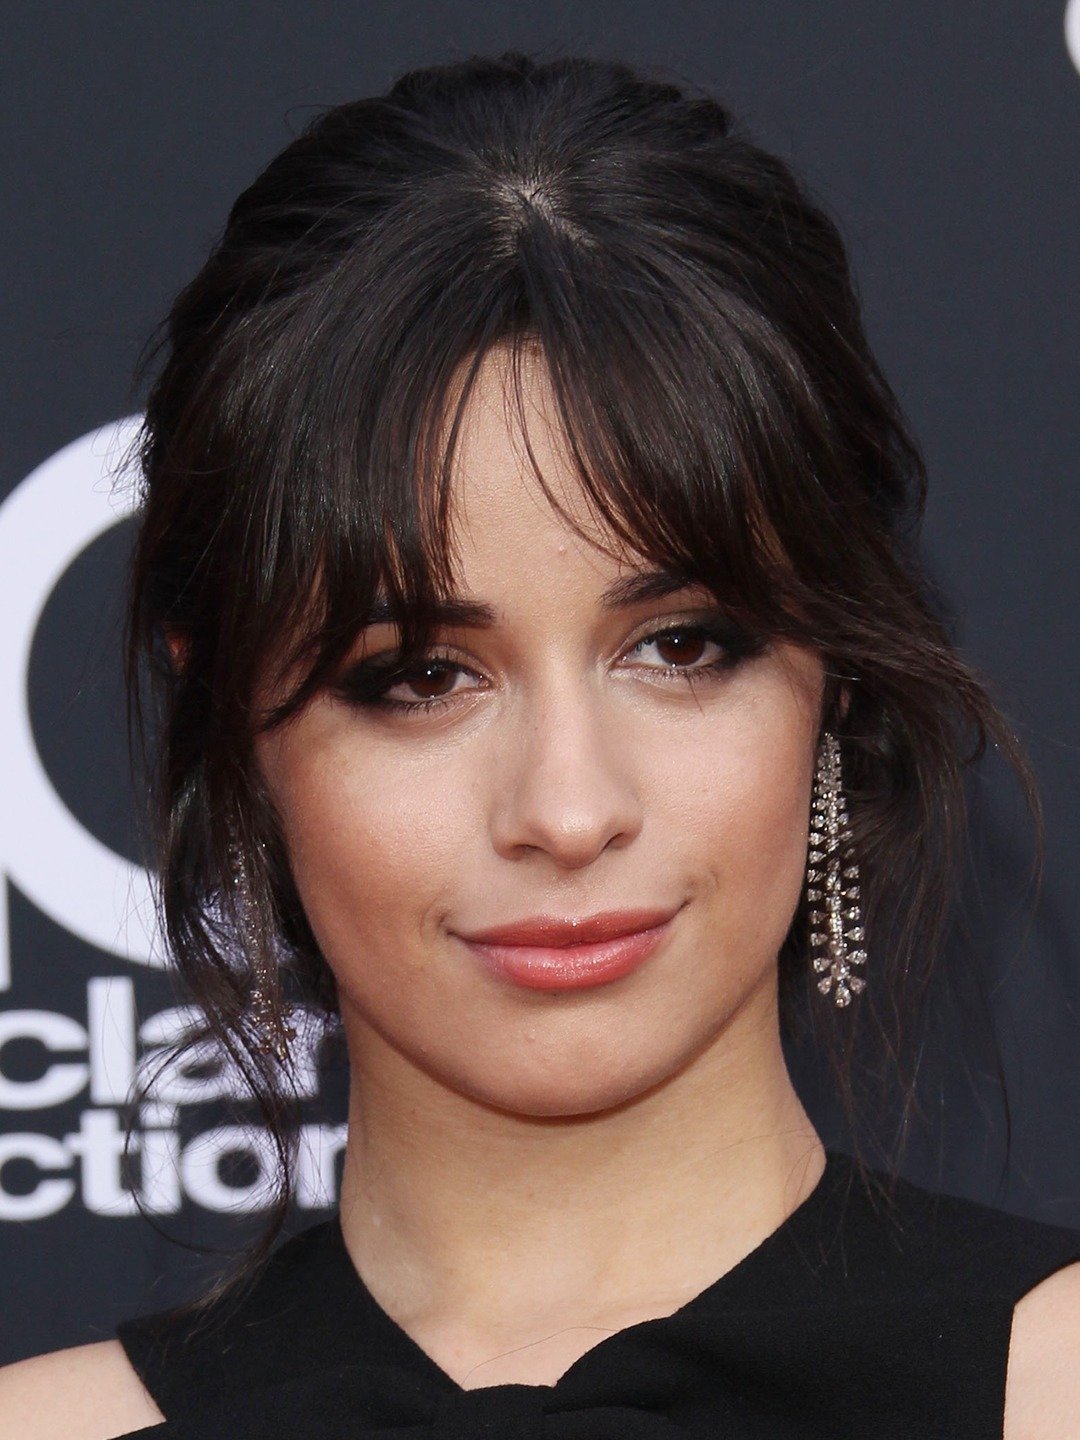 How tall is Camila Cabello?